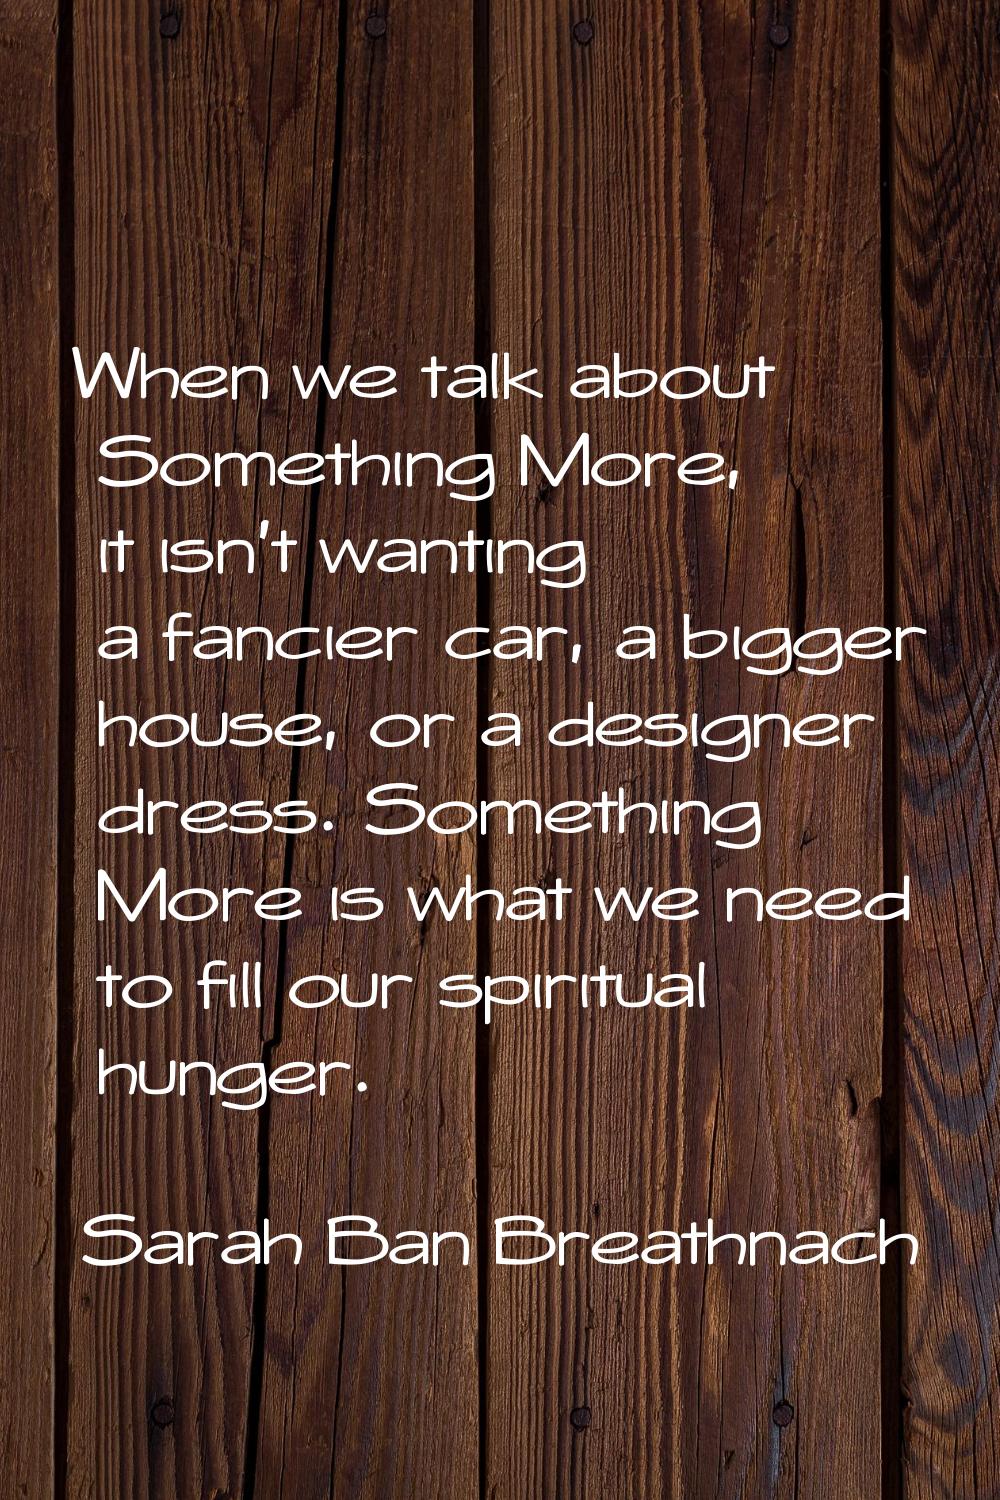 When we talk about Something More, it isn't wanting a fancier car, a bigger house, or a designer dr